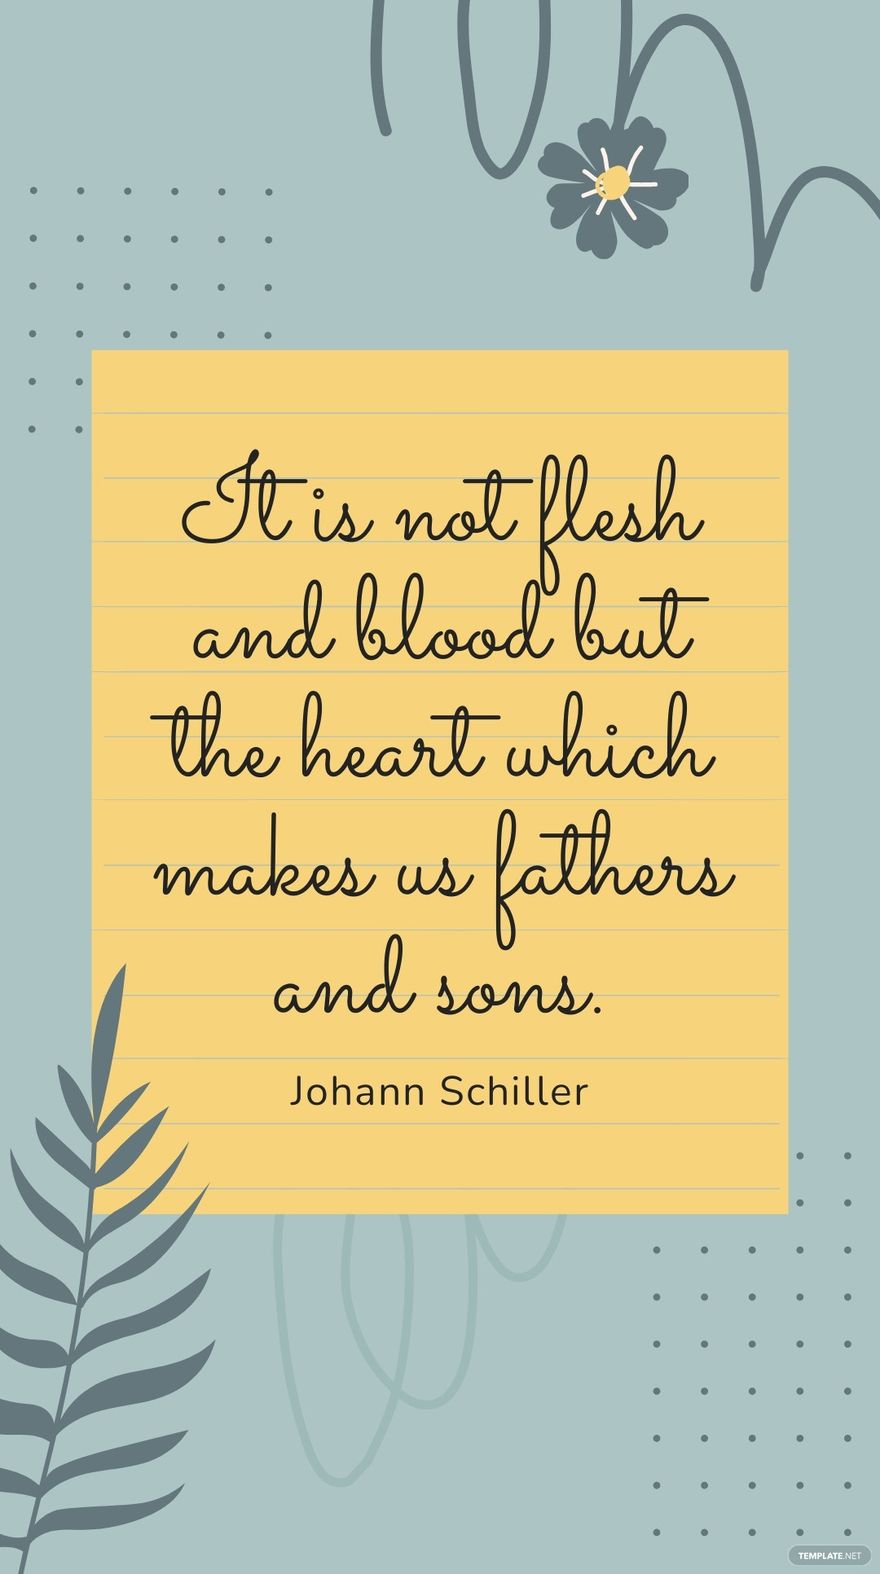 Free Johann Schiller - It is not flesh and blood but the heart which makes us fathers and sons. in JPG